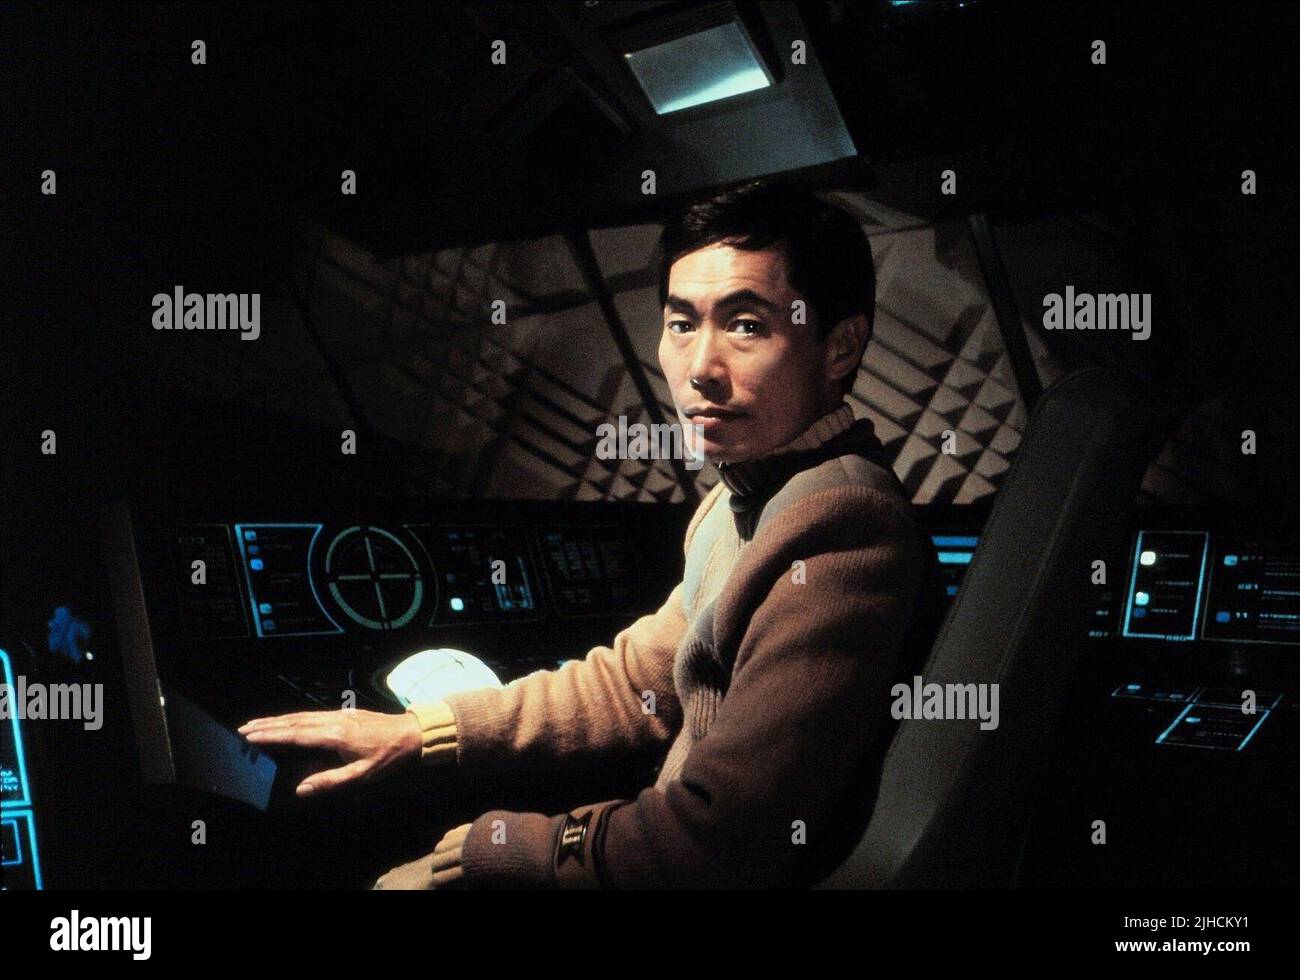 GEORGE TAKEI (COMM H SULU), STAR TREK V: THE FINAL FRONTIER, 1989 Stock Photo